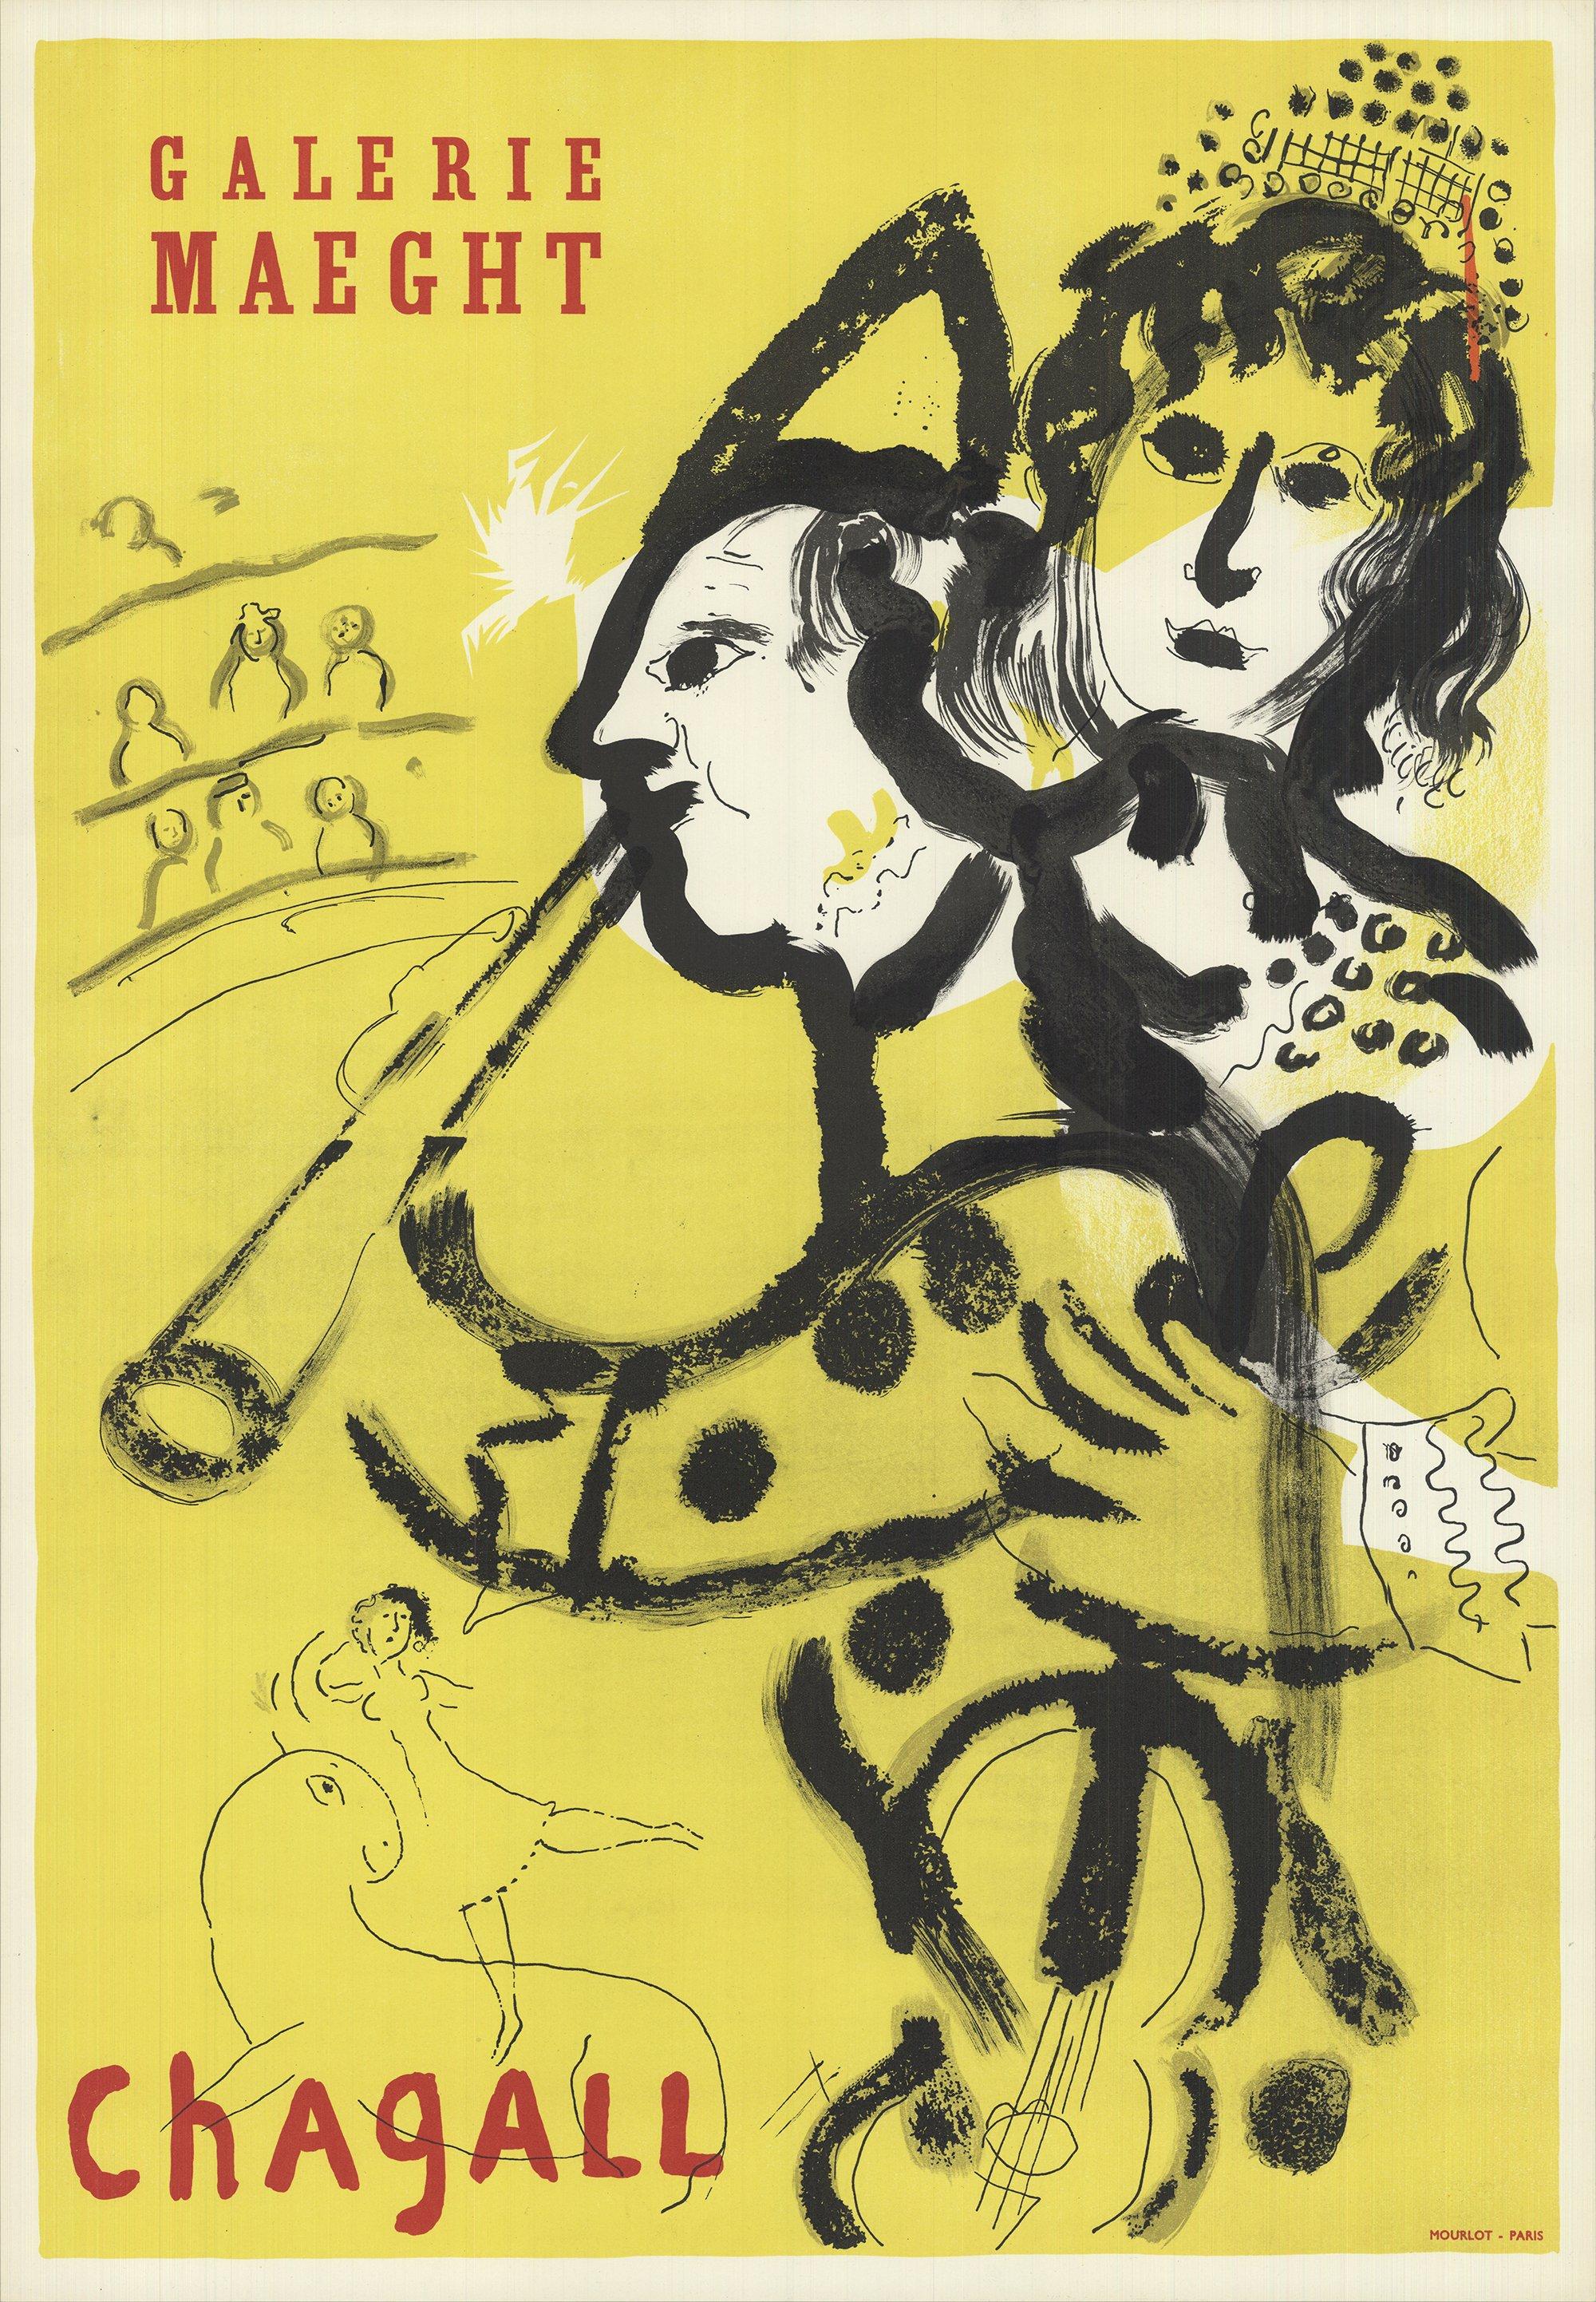 Marc Chagall 'Galerie Maeght' stone lithograph